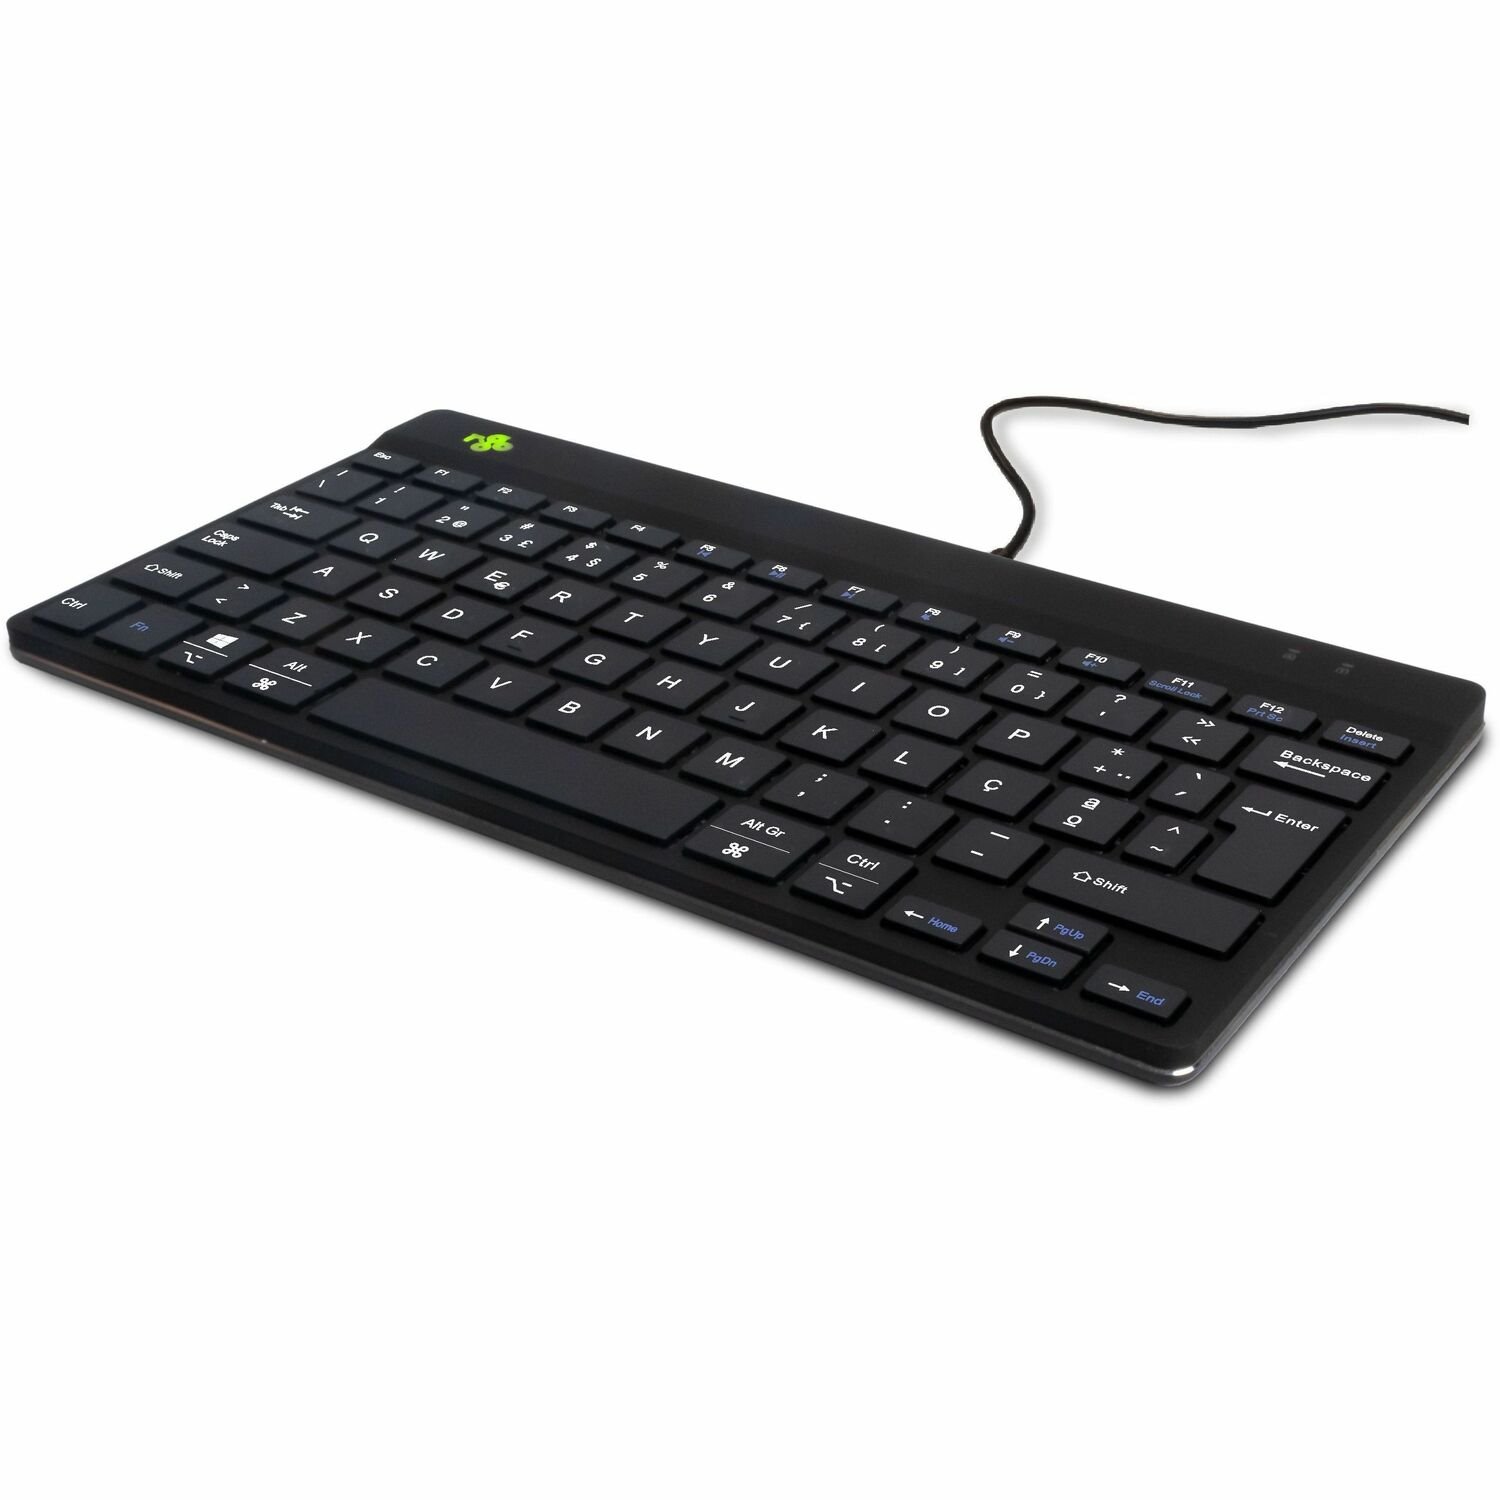 R-Go Compact Break Keyboard - Cable Connectivity - USB Interface - Portuguese - QWERTY Layout - Black